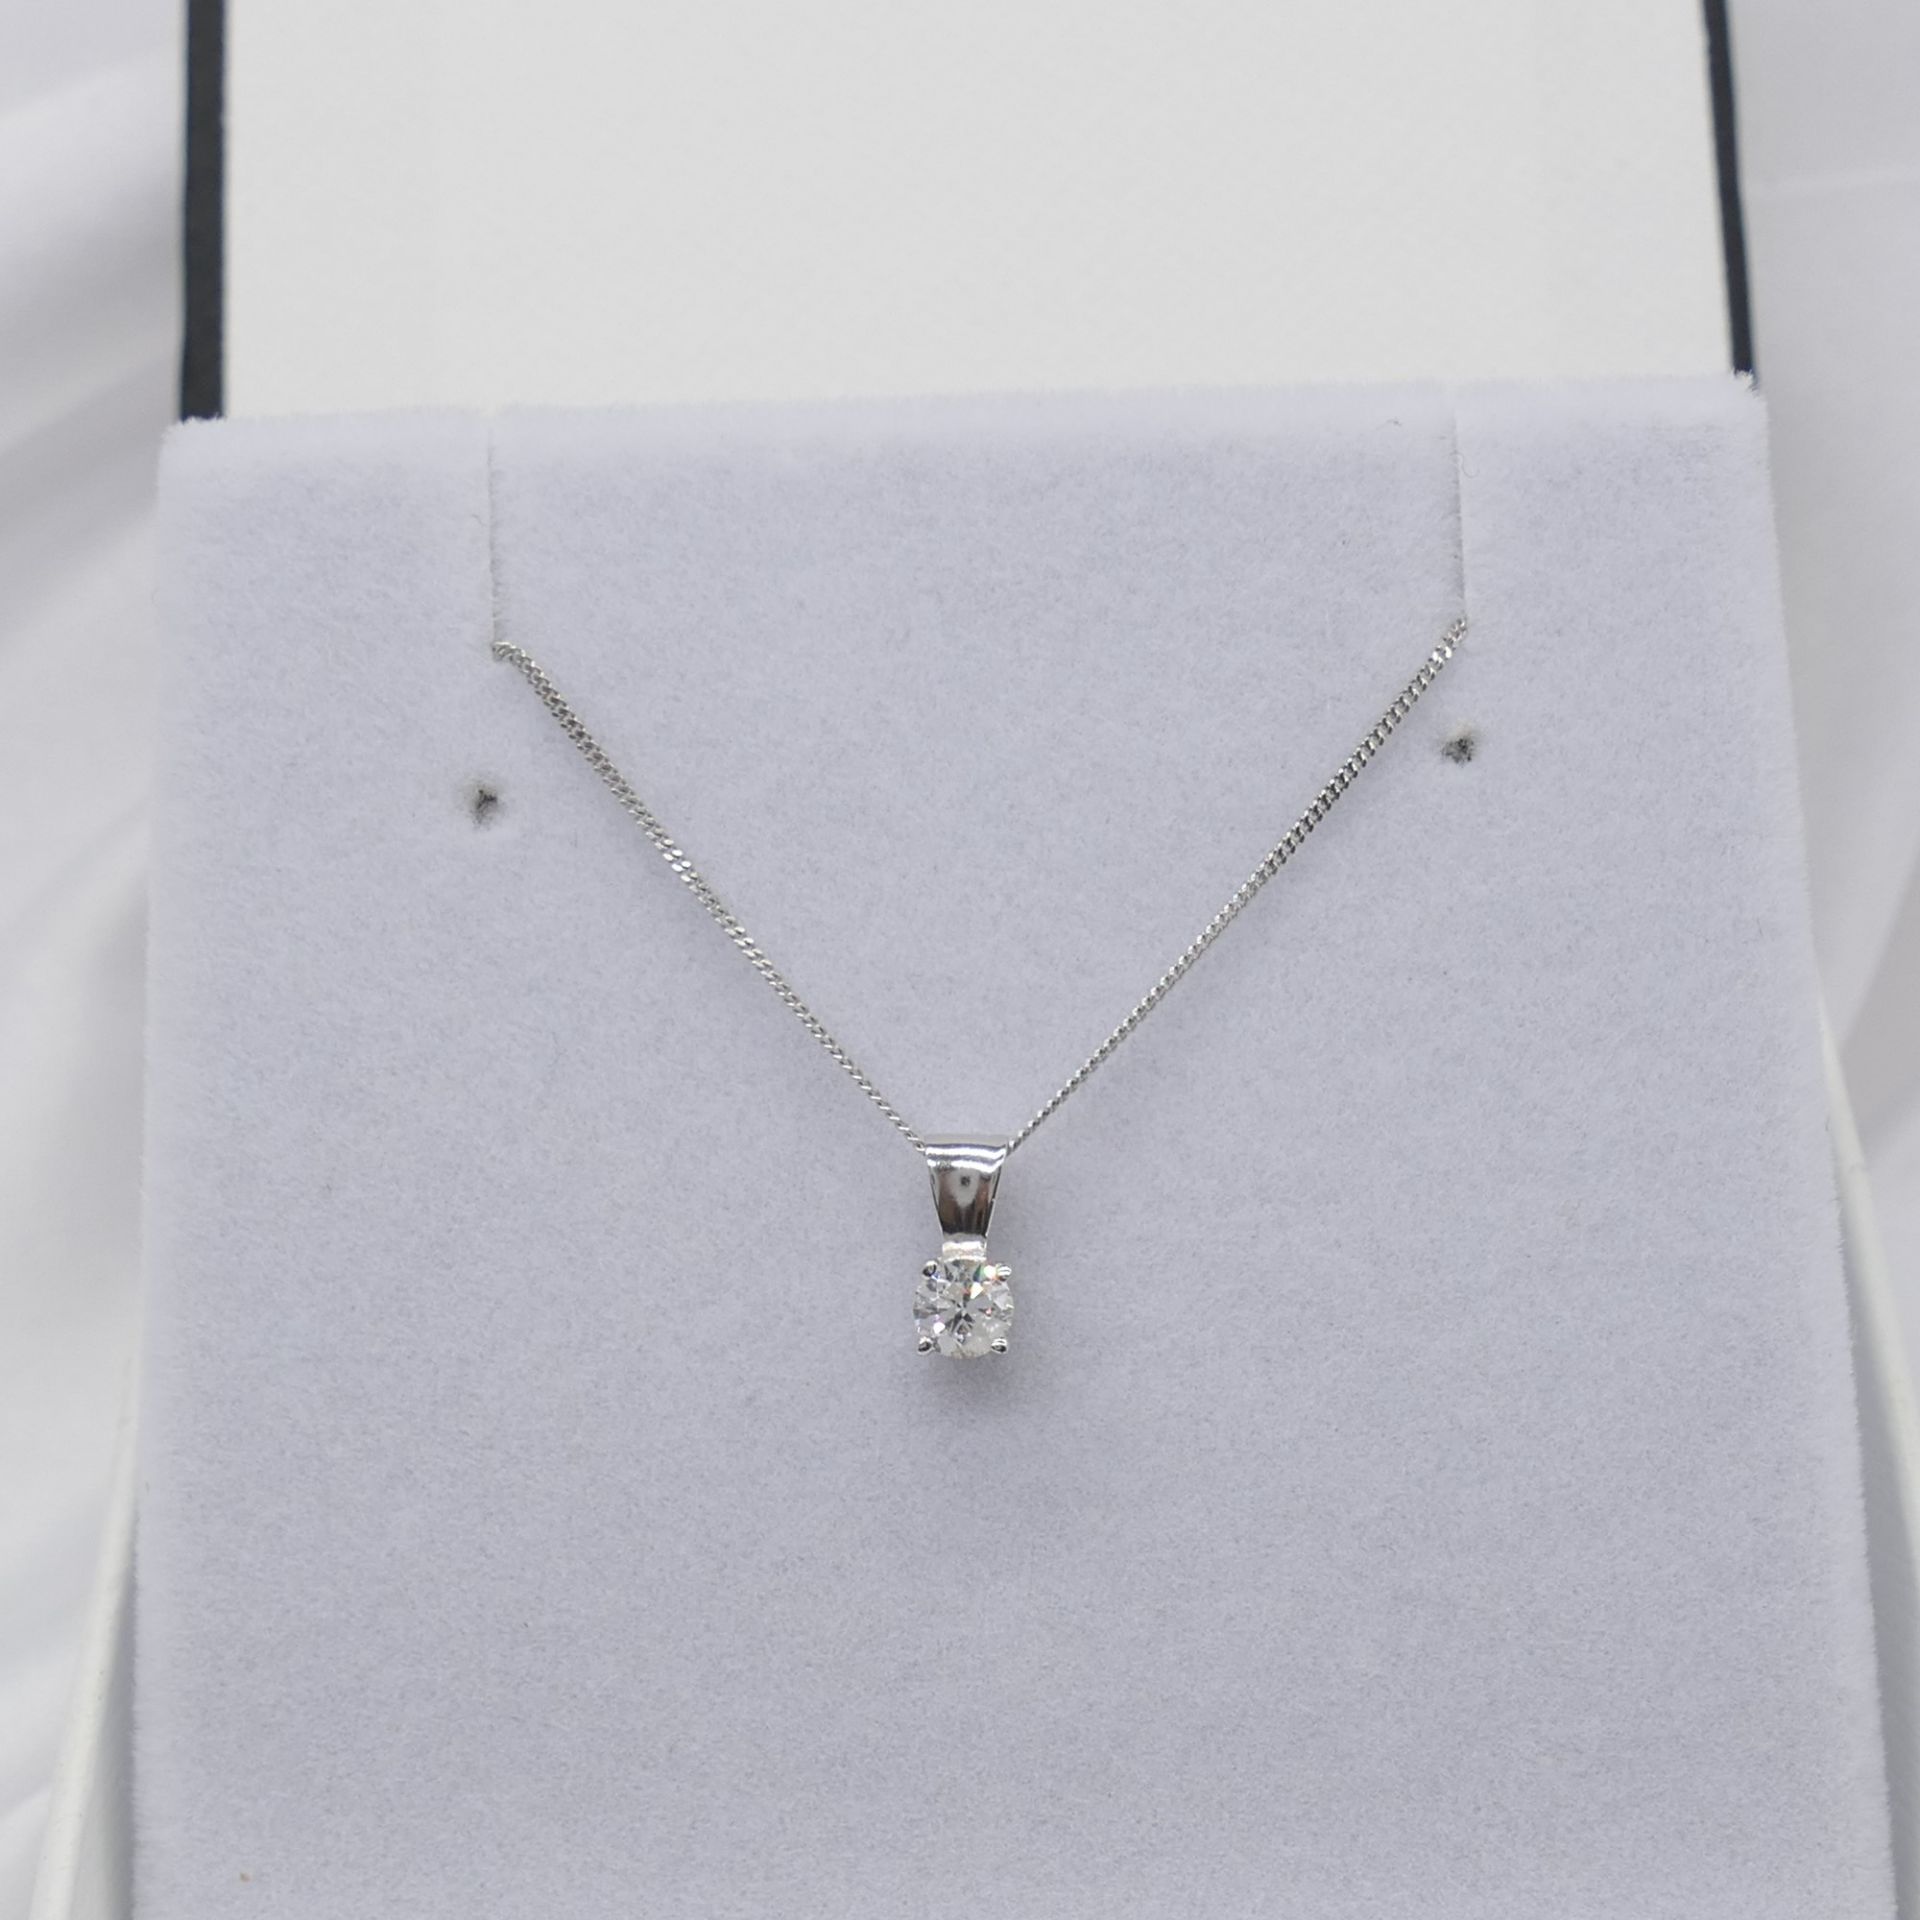 0.15 carat diamond solitaire necklace in white gol - Image 4 of 8